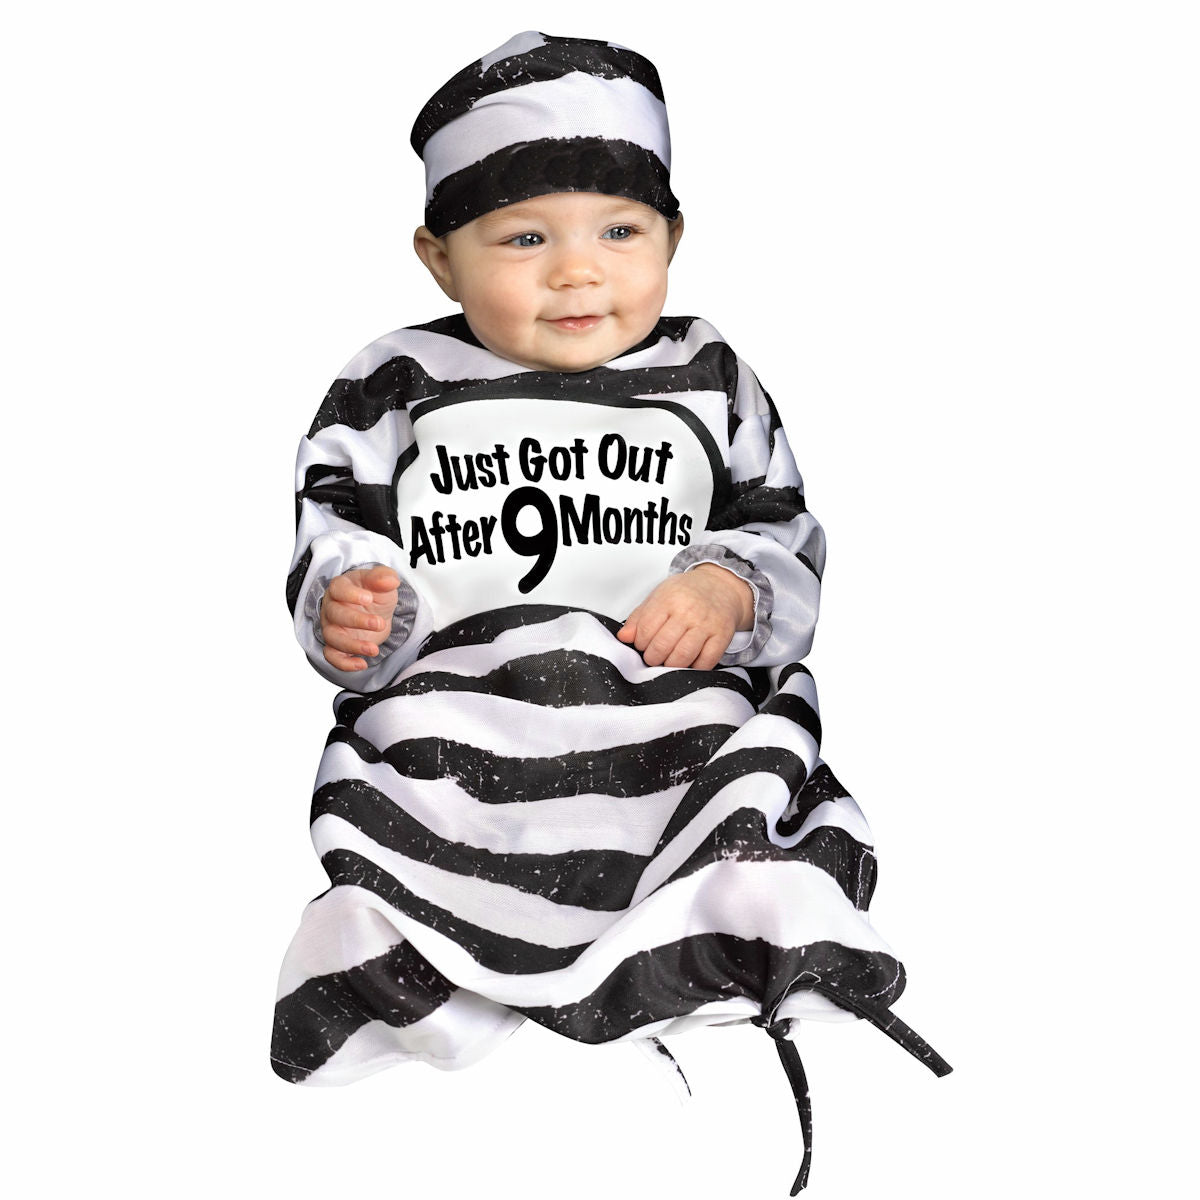 Time Out Tot Baby Child Infant Convict Fancy Dress Costume fits to 6 to 9 months